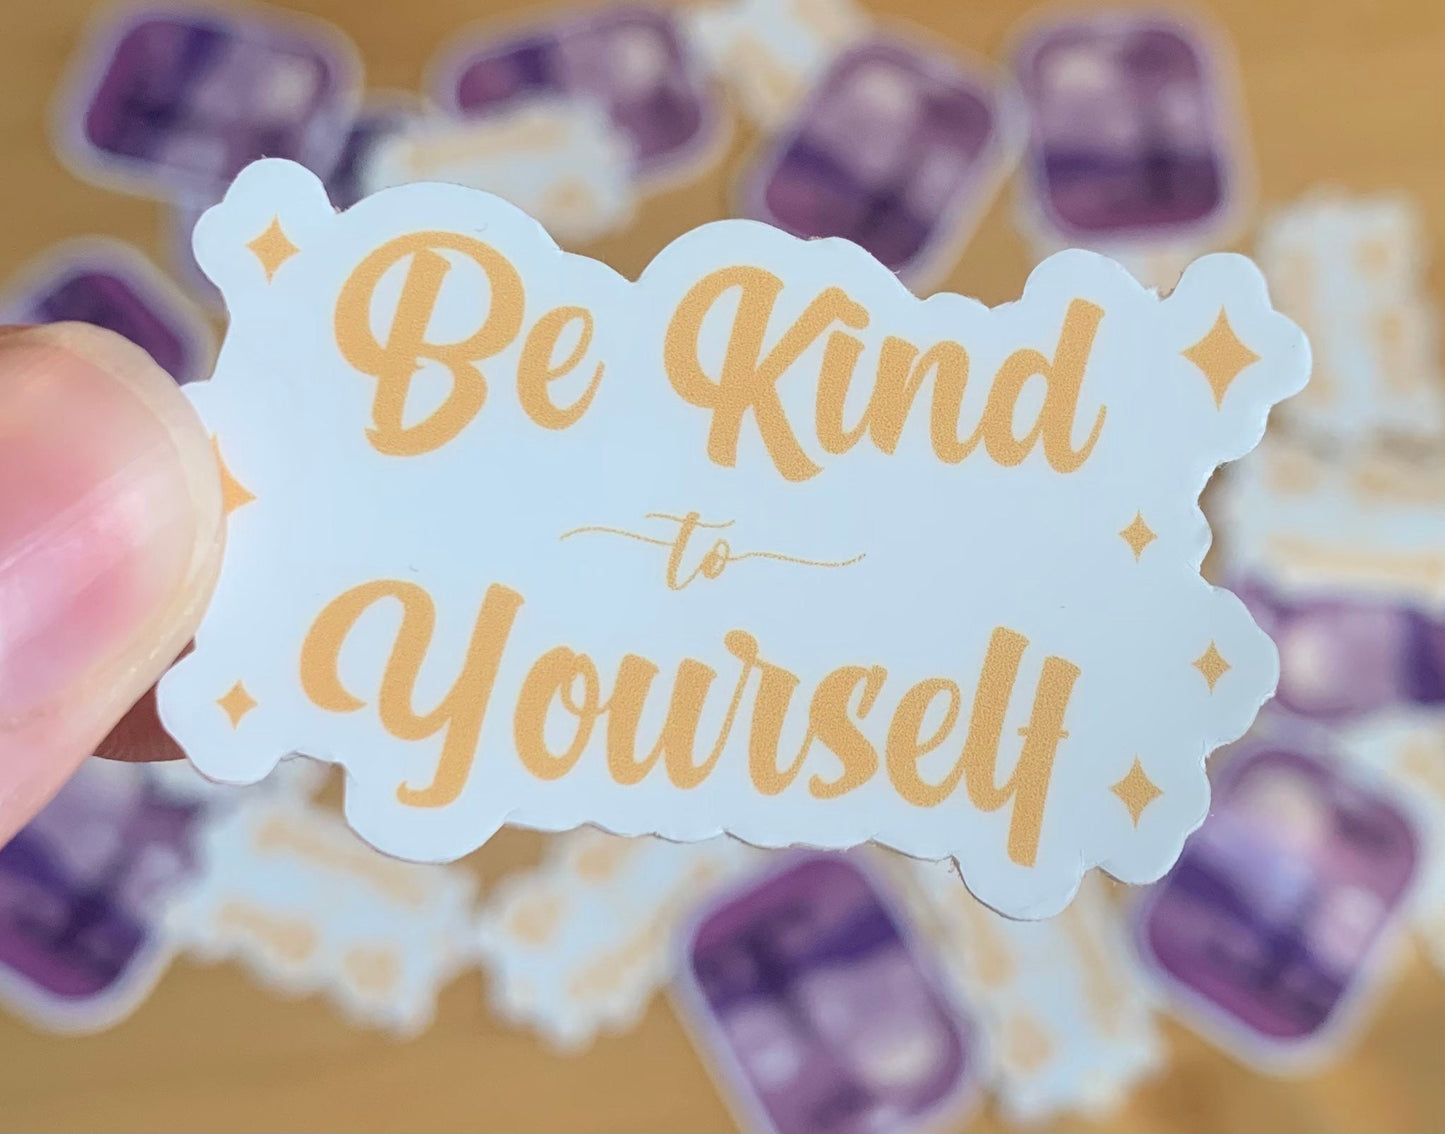 Be Kind To Yourself Vinyl Sticker